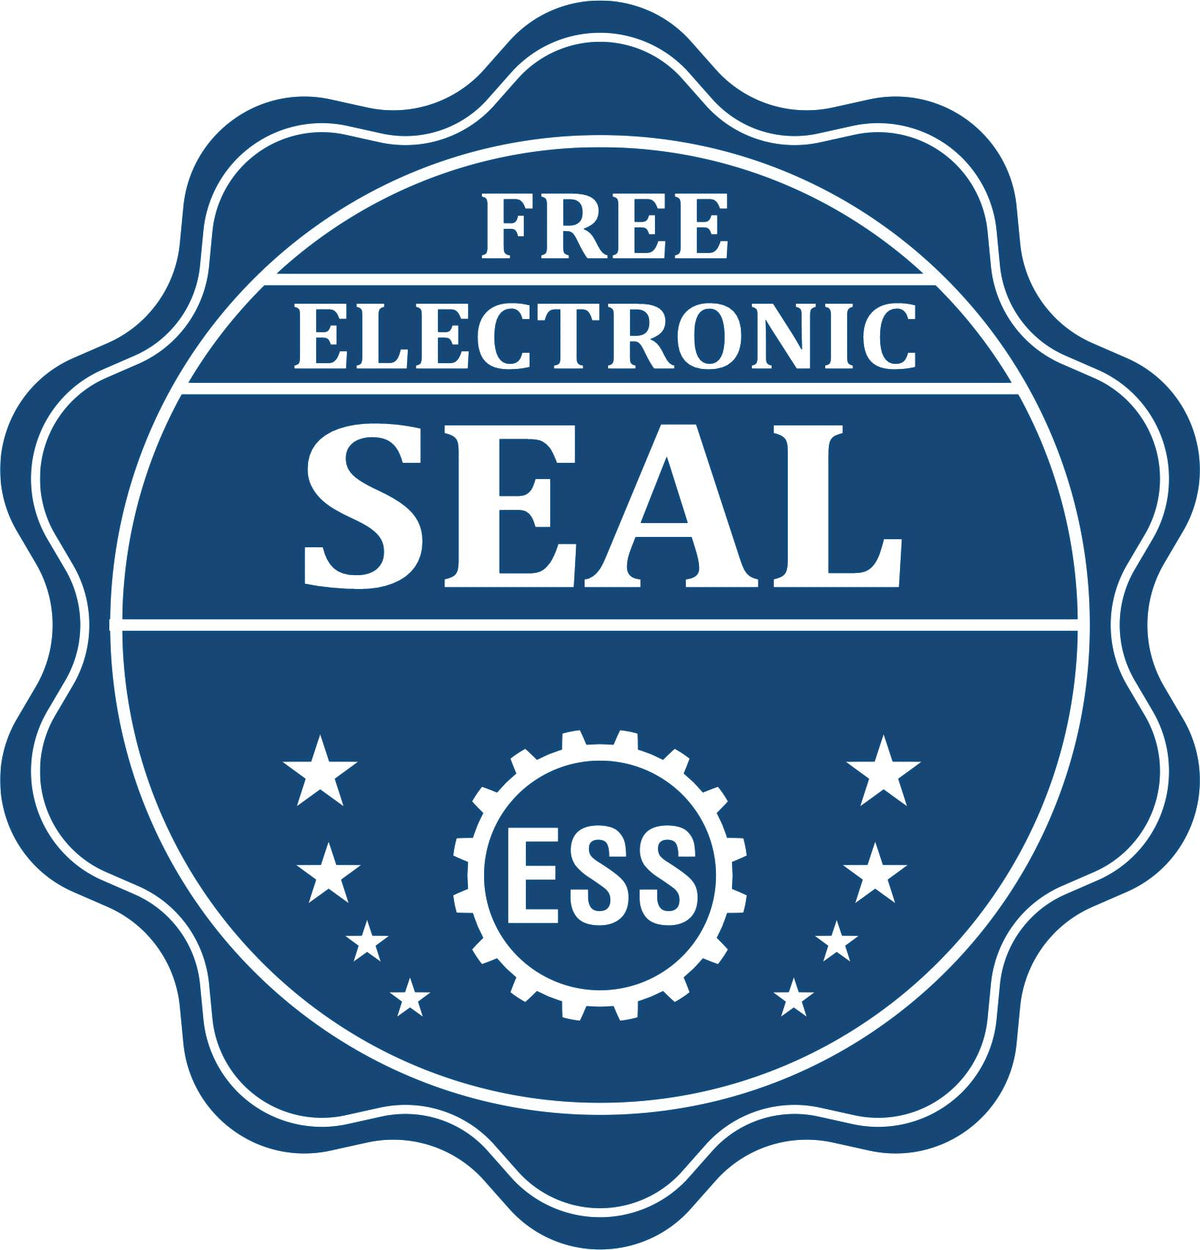 A badge showing a free electronic seal for the Gift Kansas Architect Seal with stars and the ESS gear on the emblem.